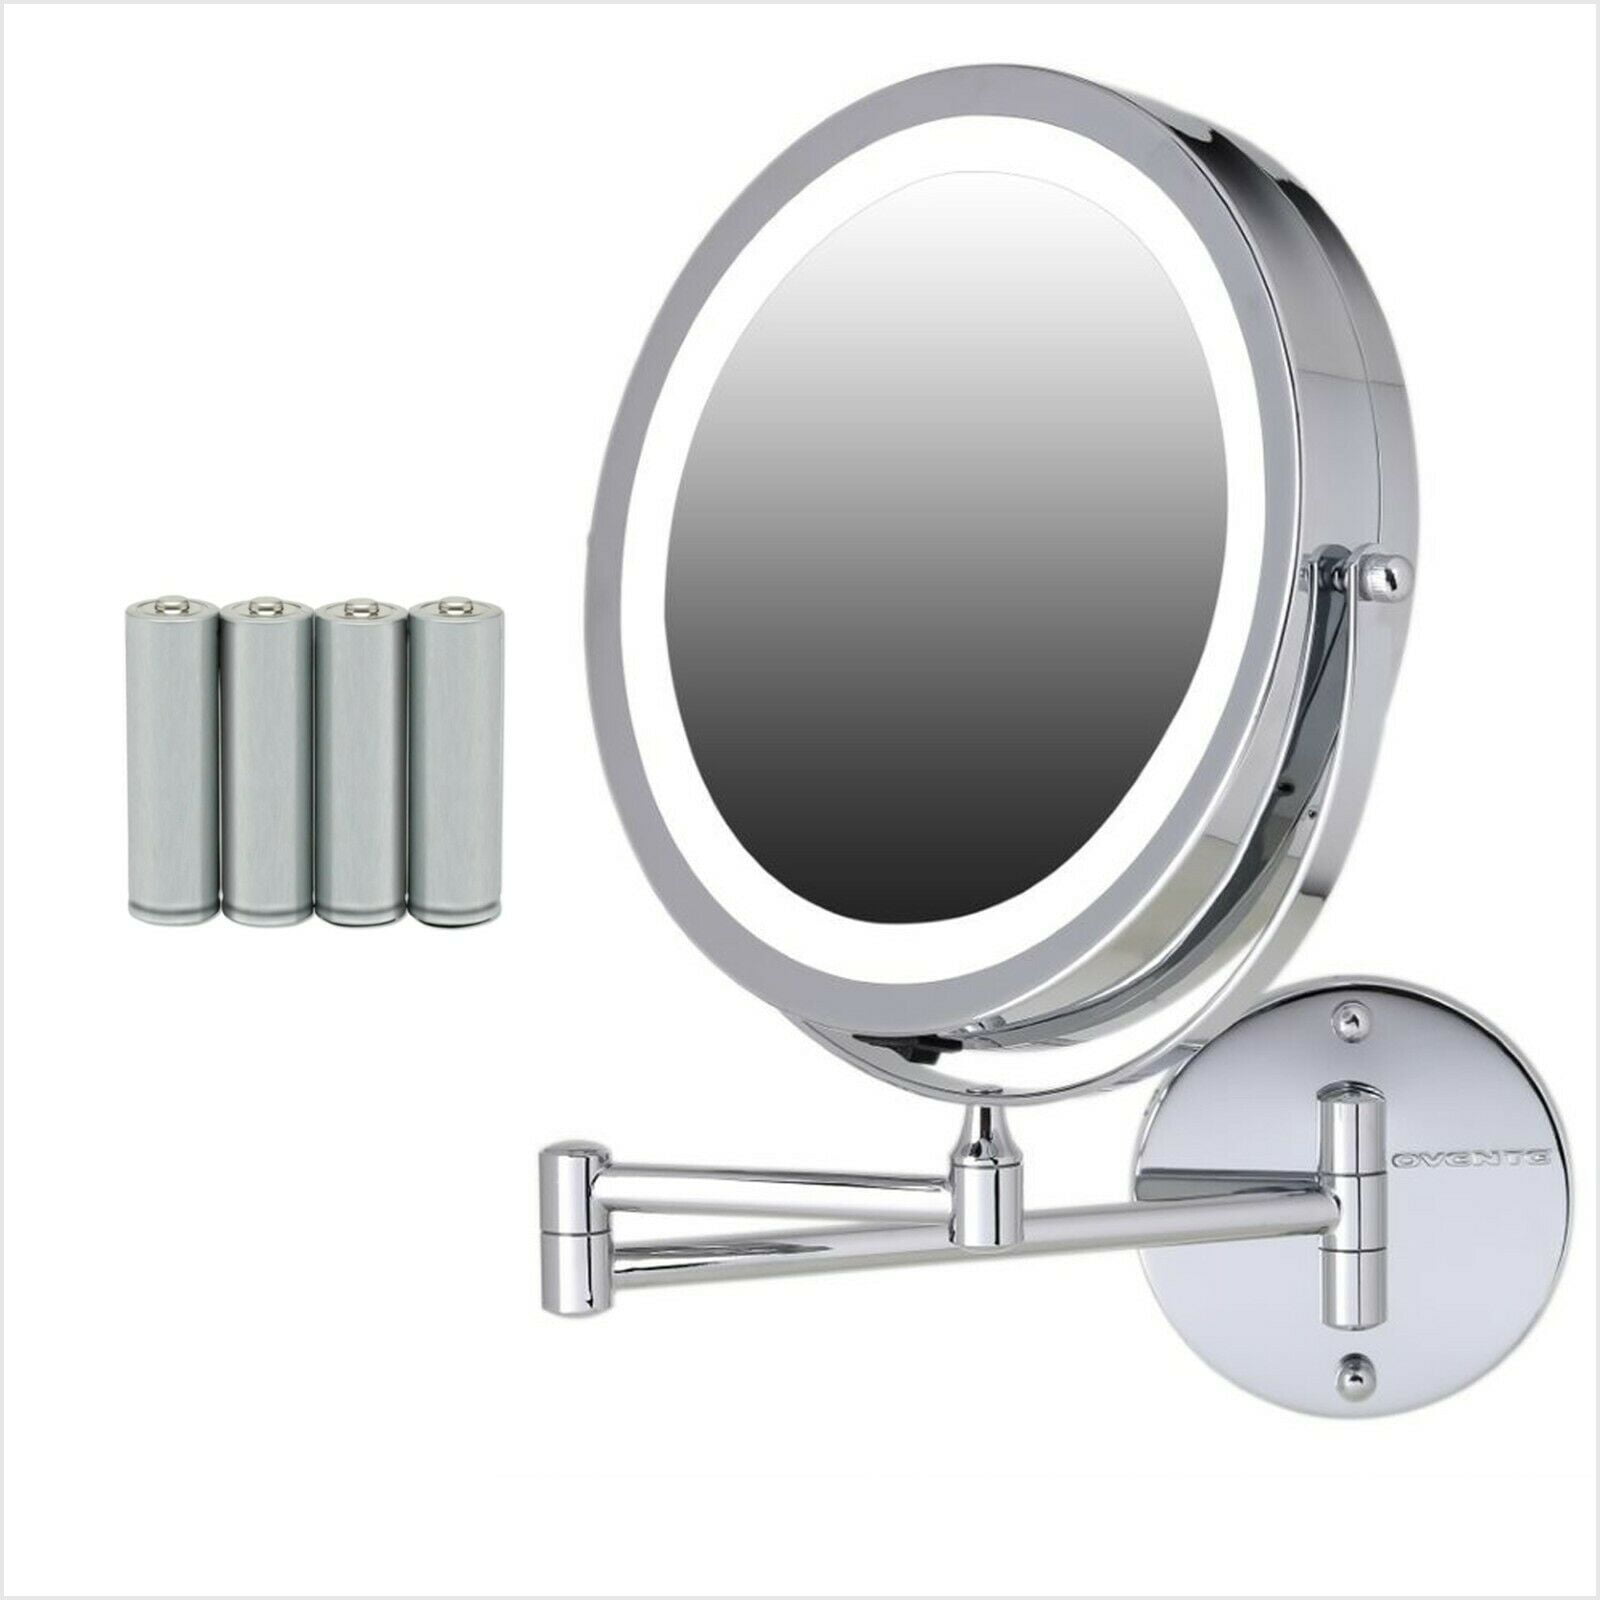 GloRiastar Cordless LED Wall Mounted Makeup Mirror with 1x 10x Magnification,Bt Powered, no Power Cord Required.360° Swivel Extendable Cosm - 1